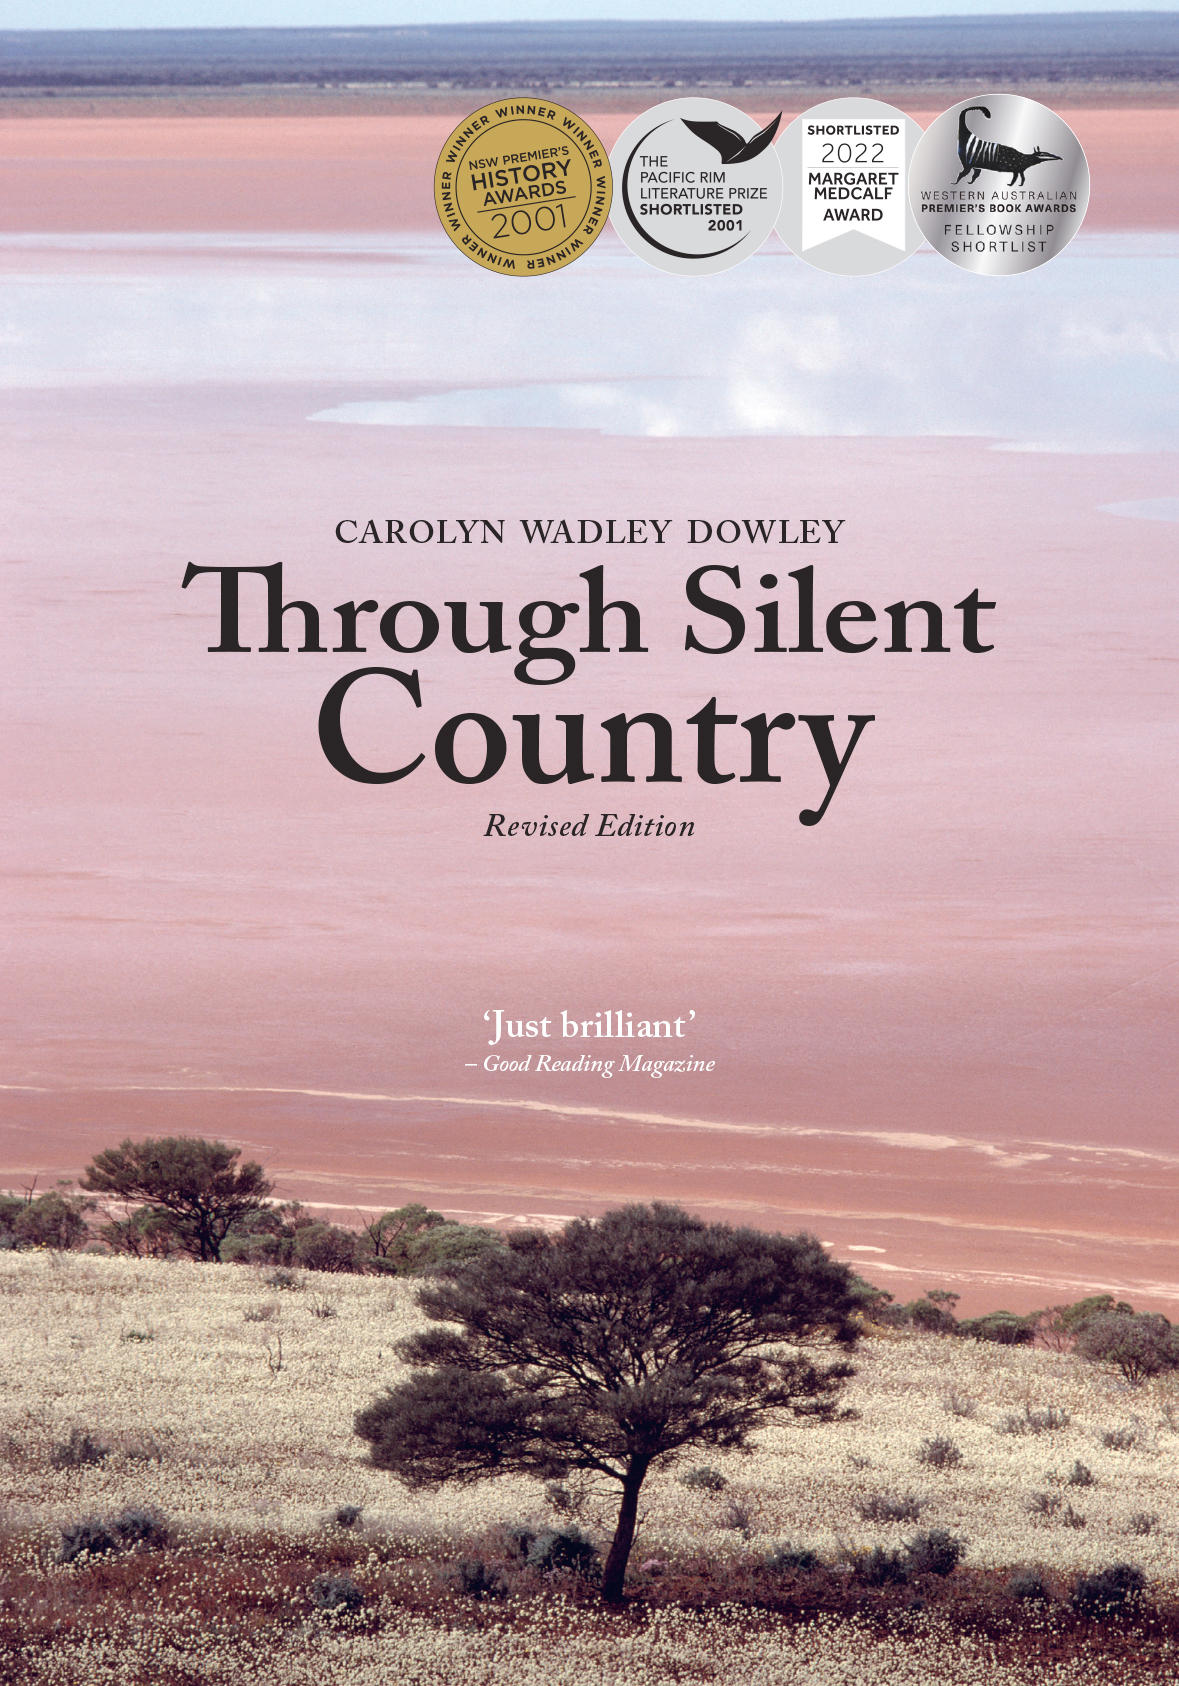 Through Silent Country Revised Edition by Carolyn Wadley Dowley